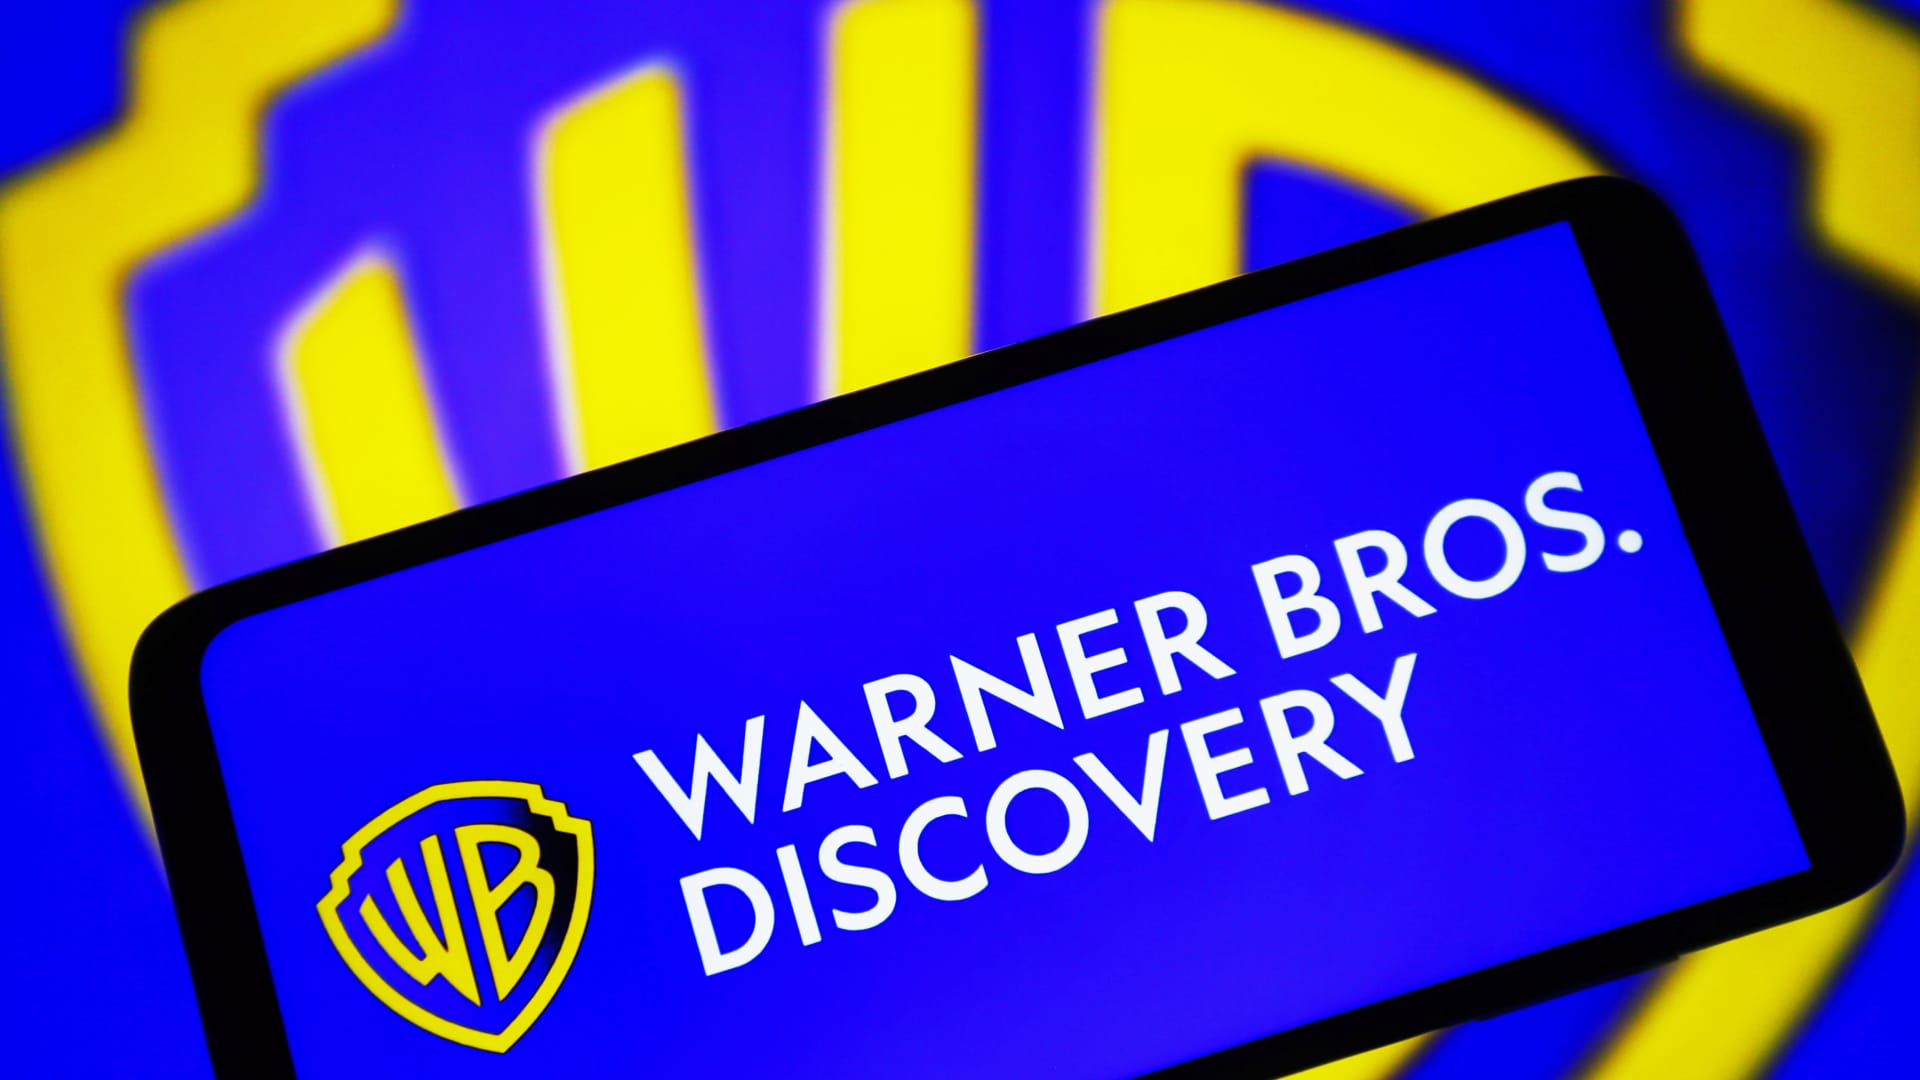 Warner Bros. Discovery stock rises for second straight day